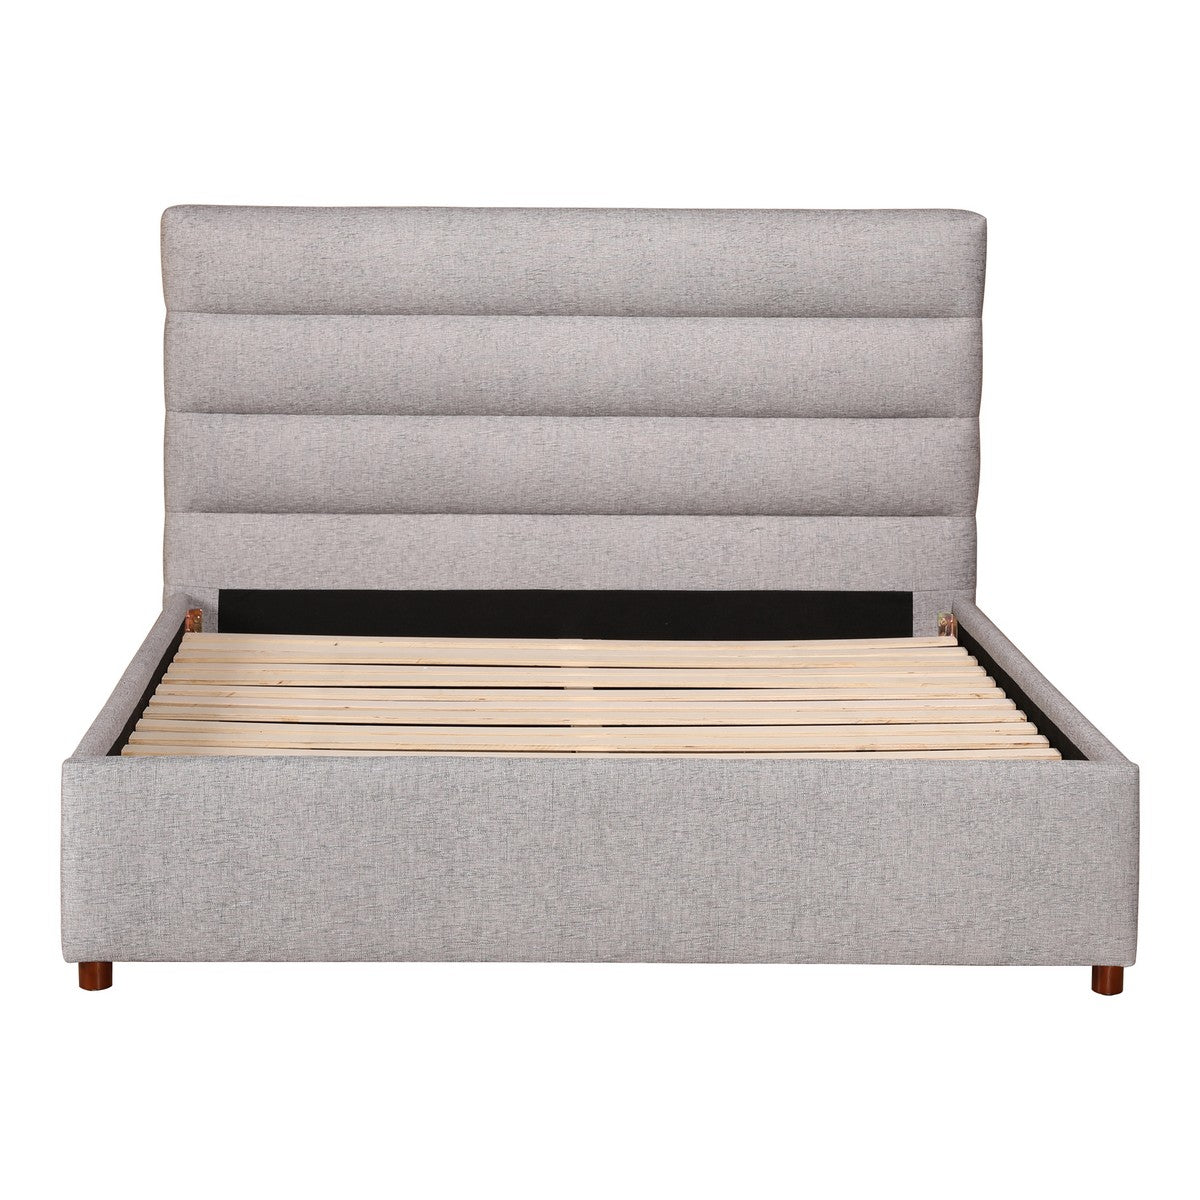 Moe's Home Collection Takio Queen Bed Light Grey - RN-1139-29 - Moe's Home Collection - Beds - Minimal And Modern - 1